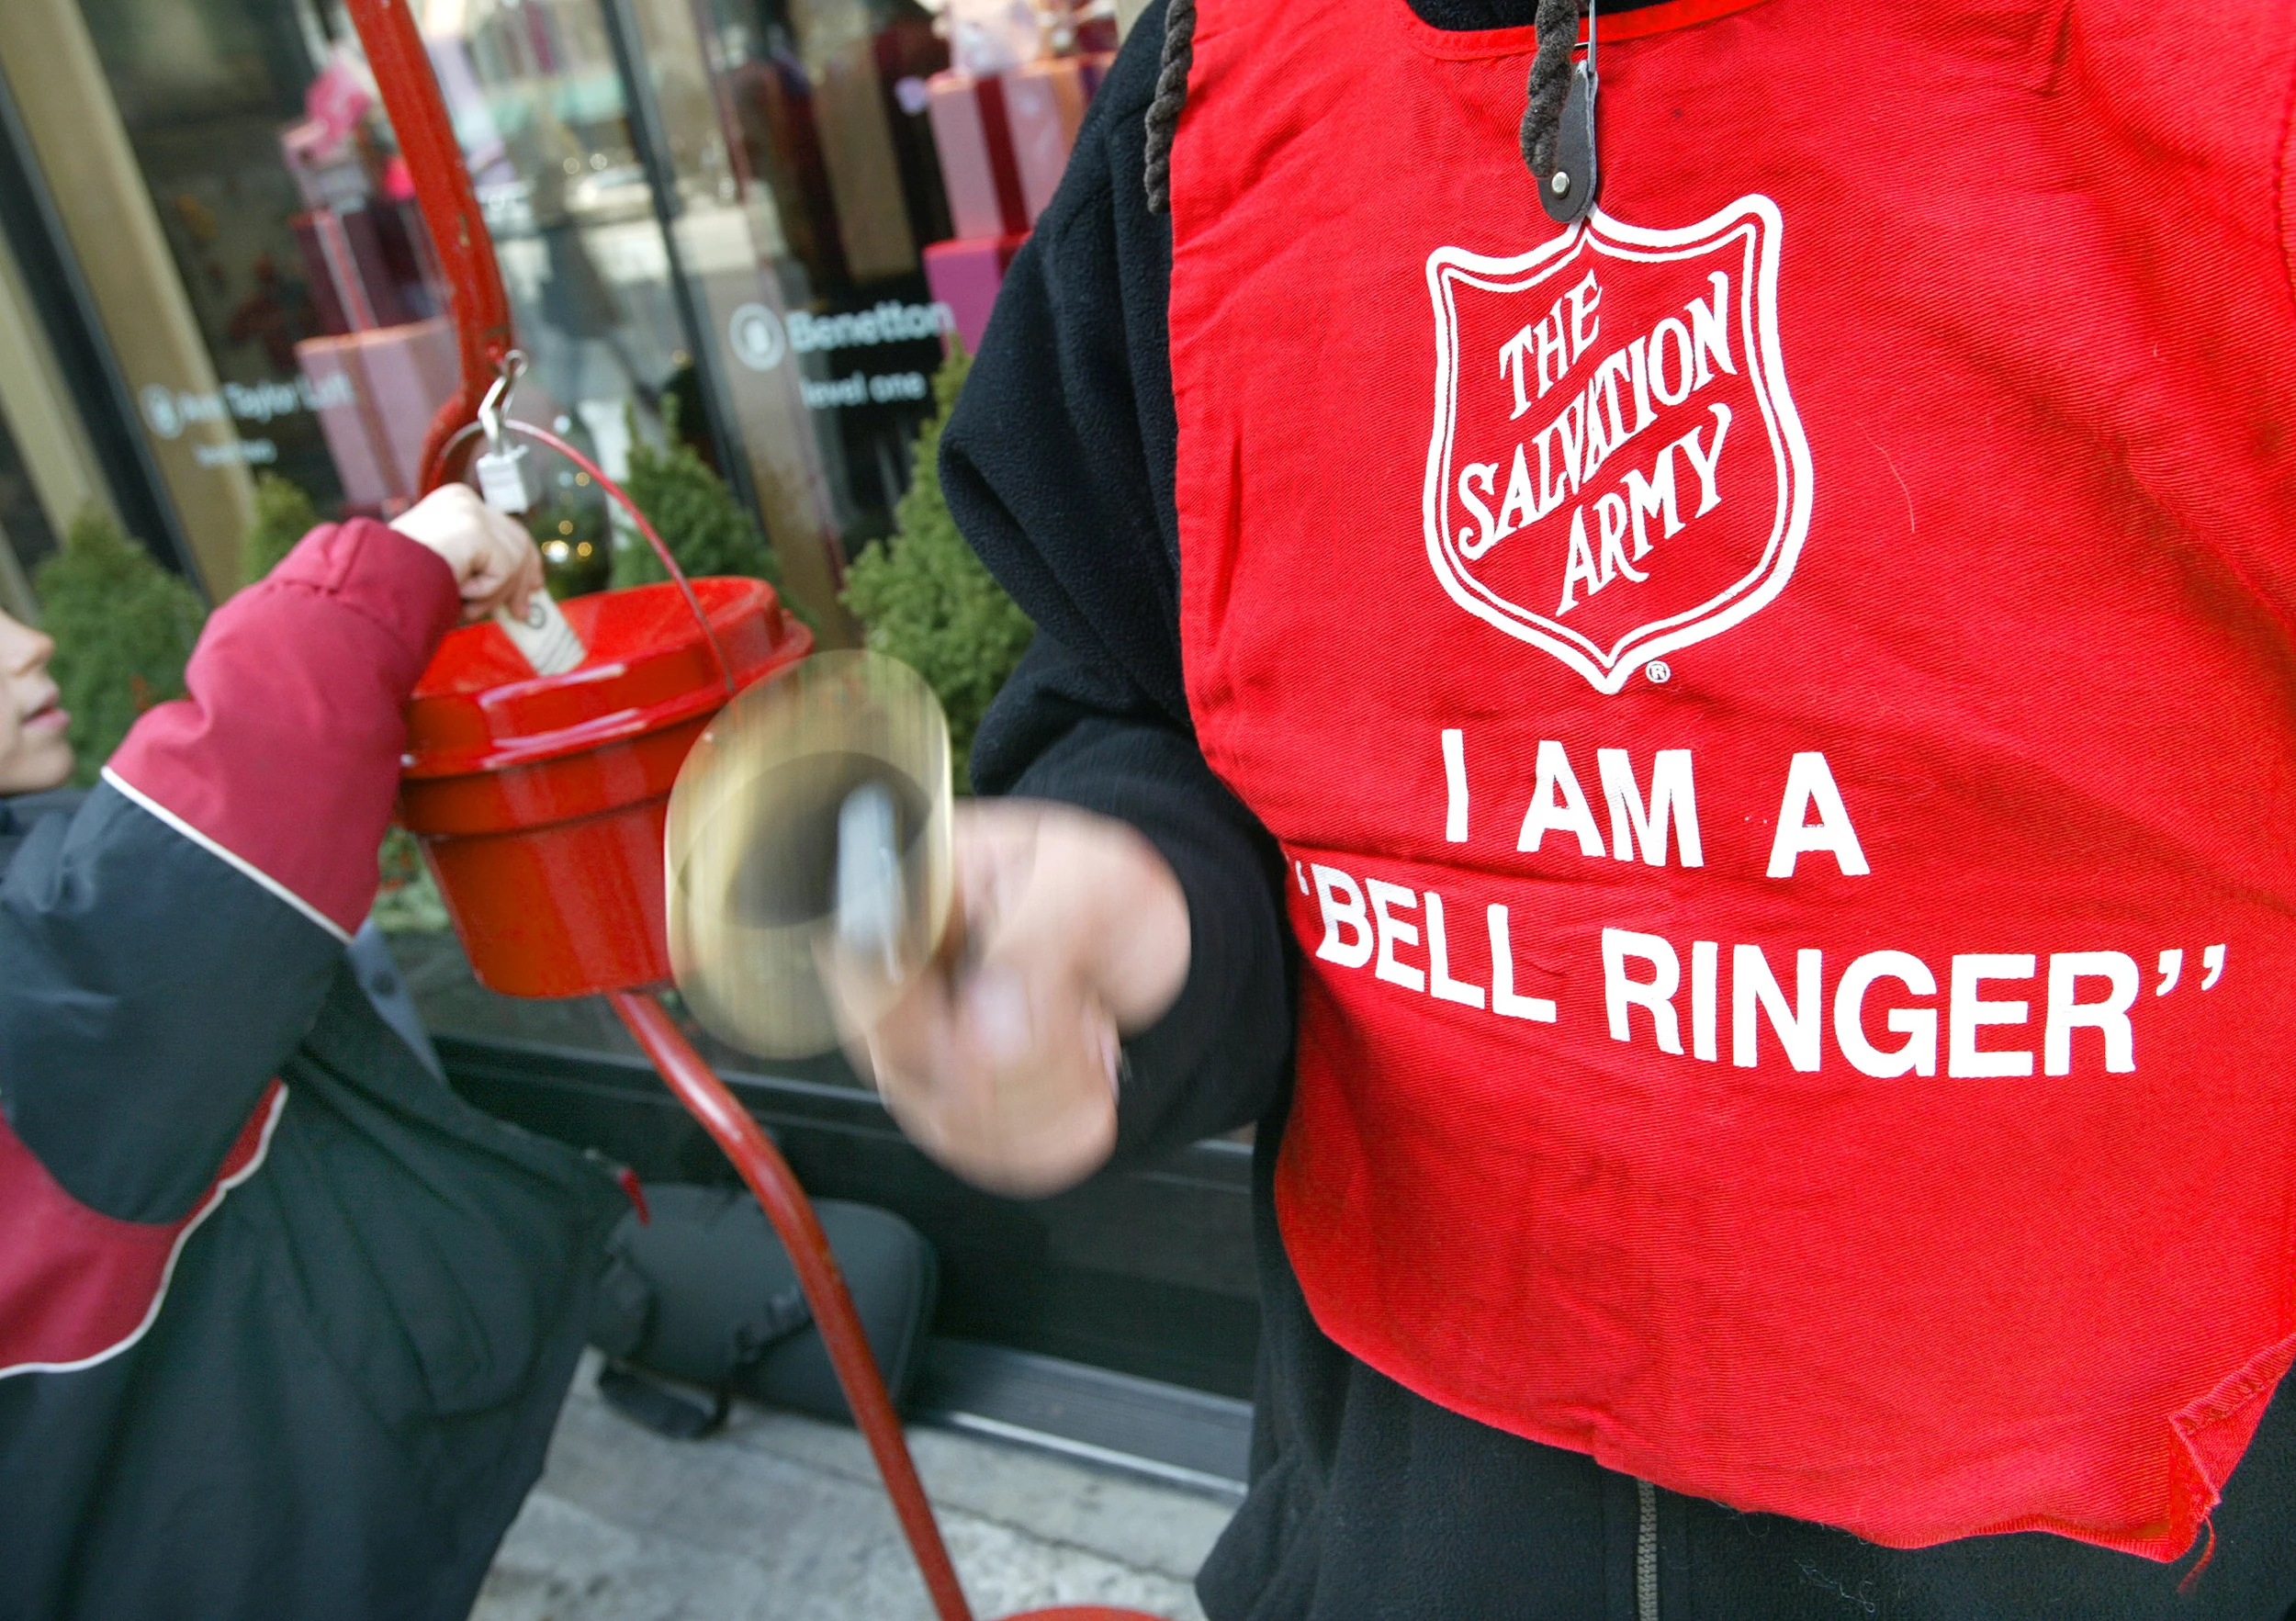 Salvation Army Job Fair Aims To Hire Bell Ringers Happening Today